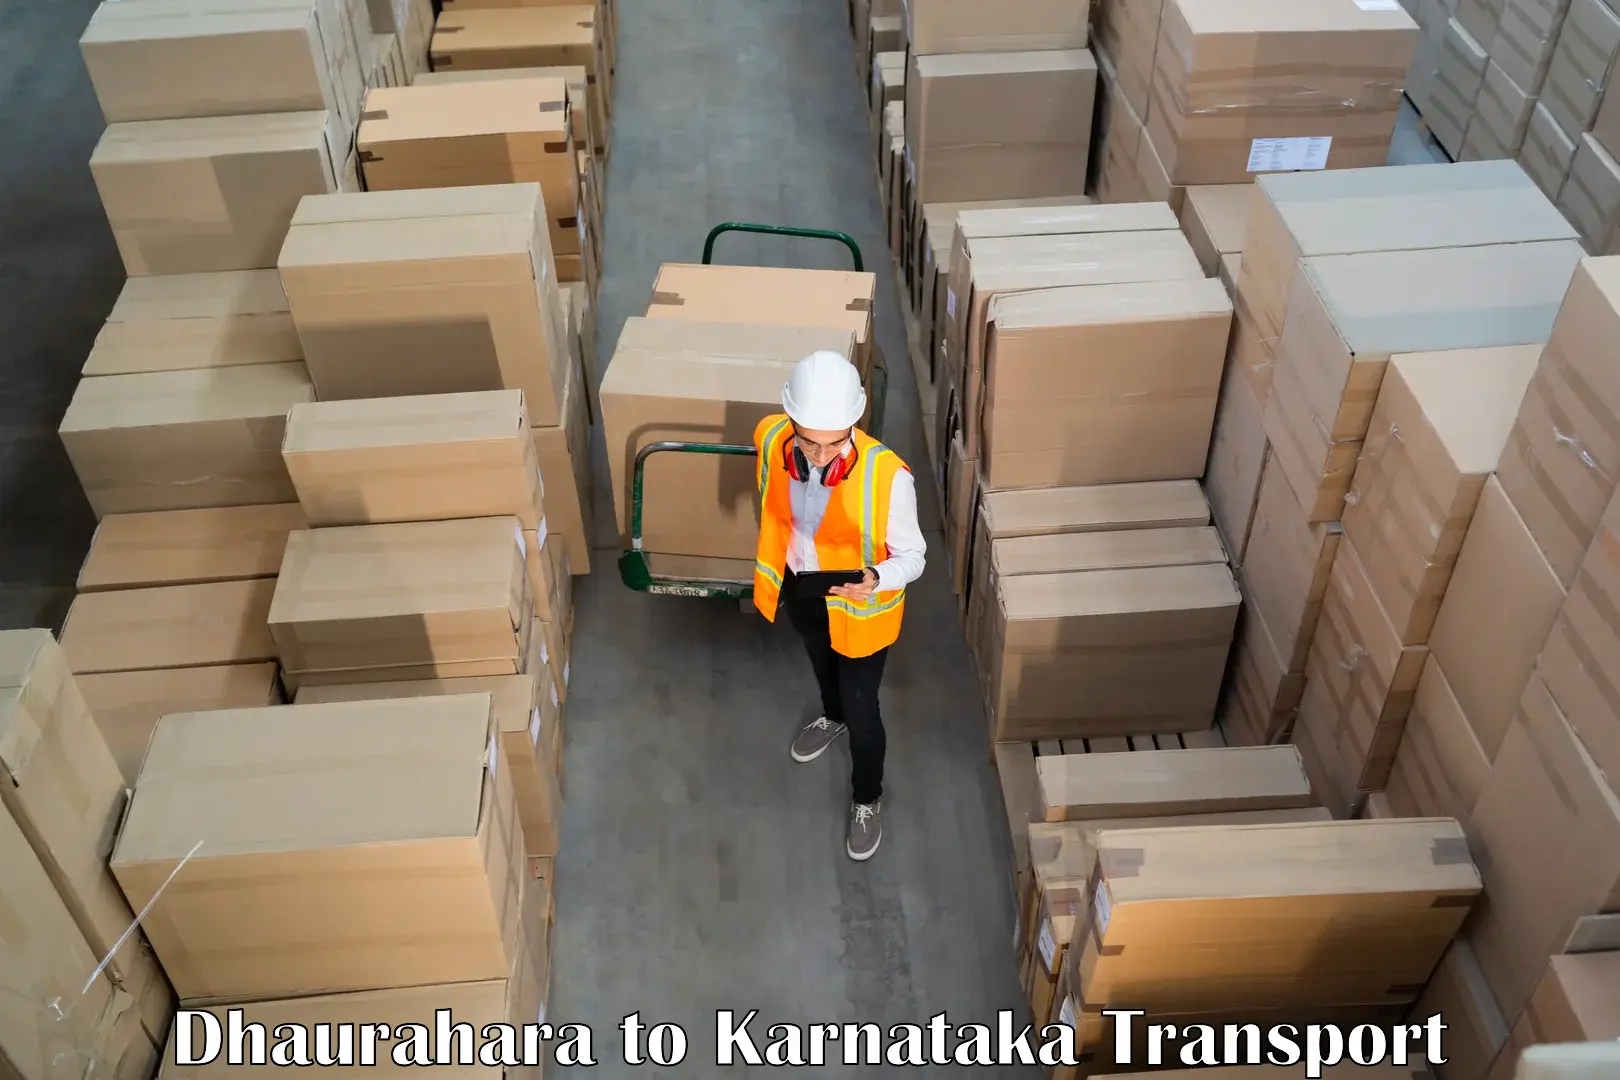 Goods delivery service Dhaurahara to Puttur